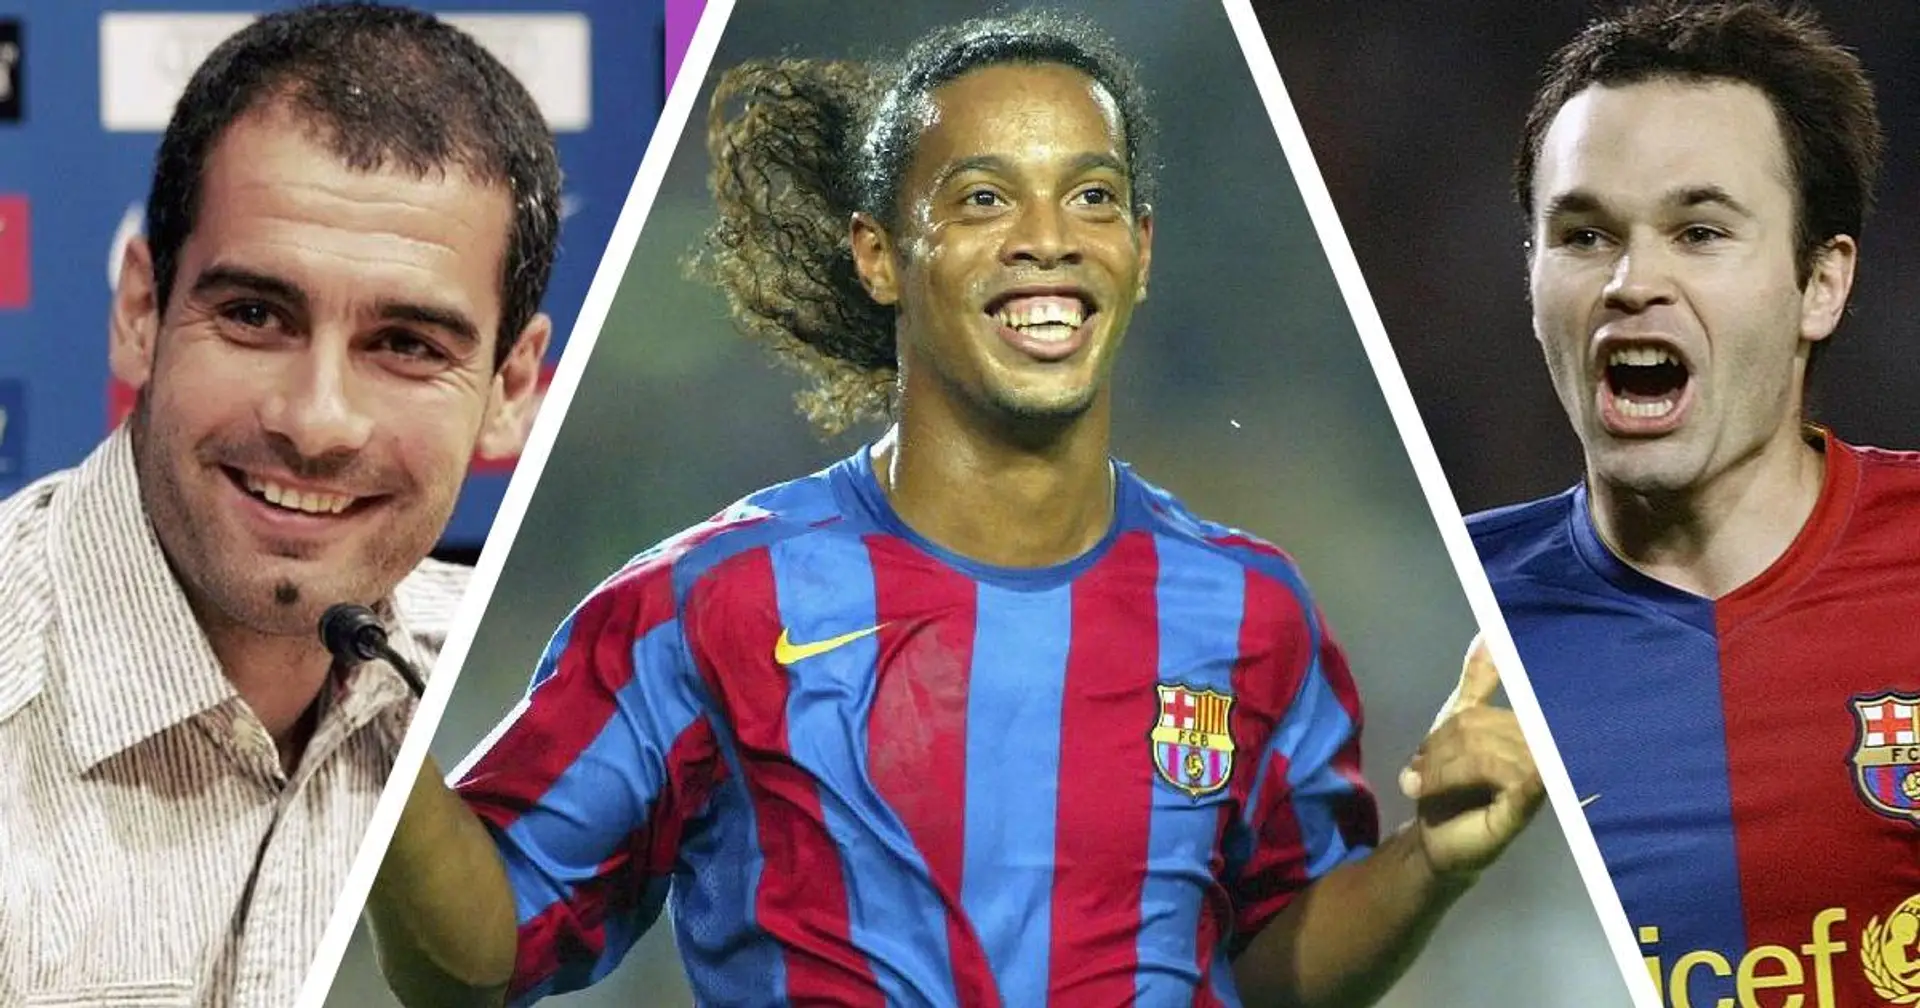 'Contagious joy', 'Pioneer of enjoying football': 5 best quotes about Ronaldinho